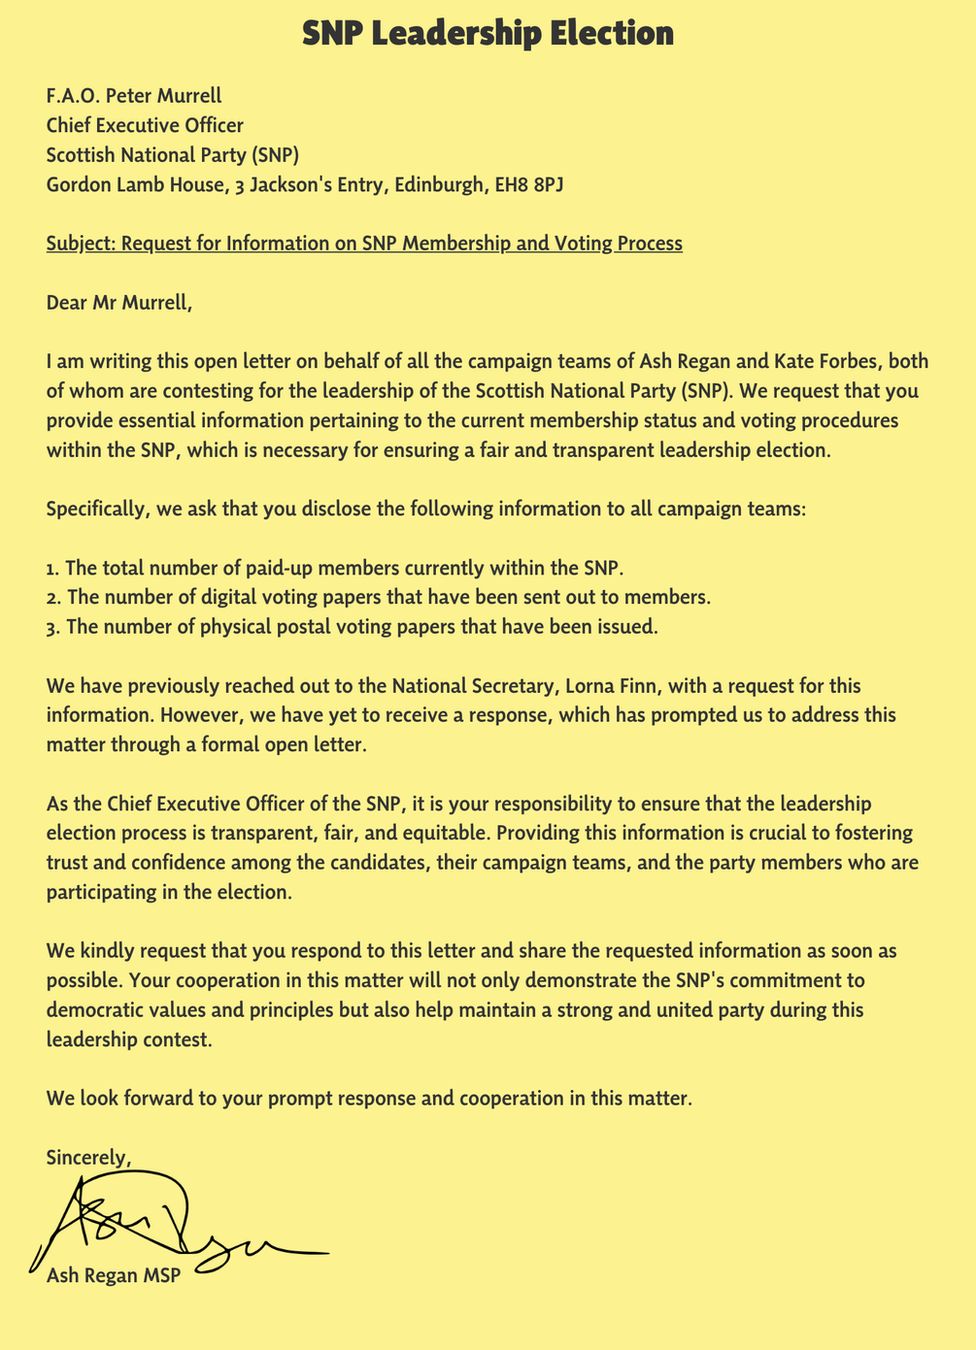 Letter from Ash Regan and Kate Forbes to Peter Murrell